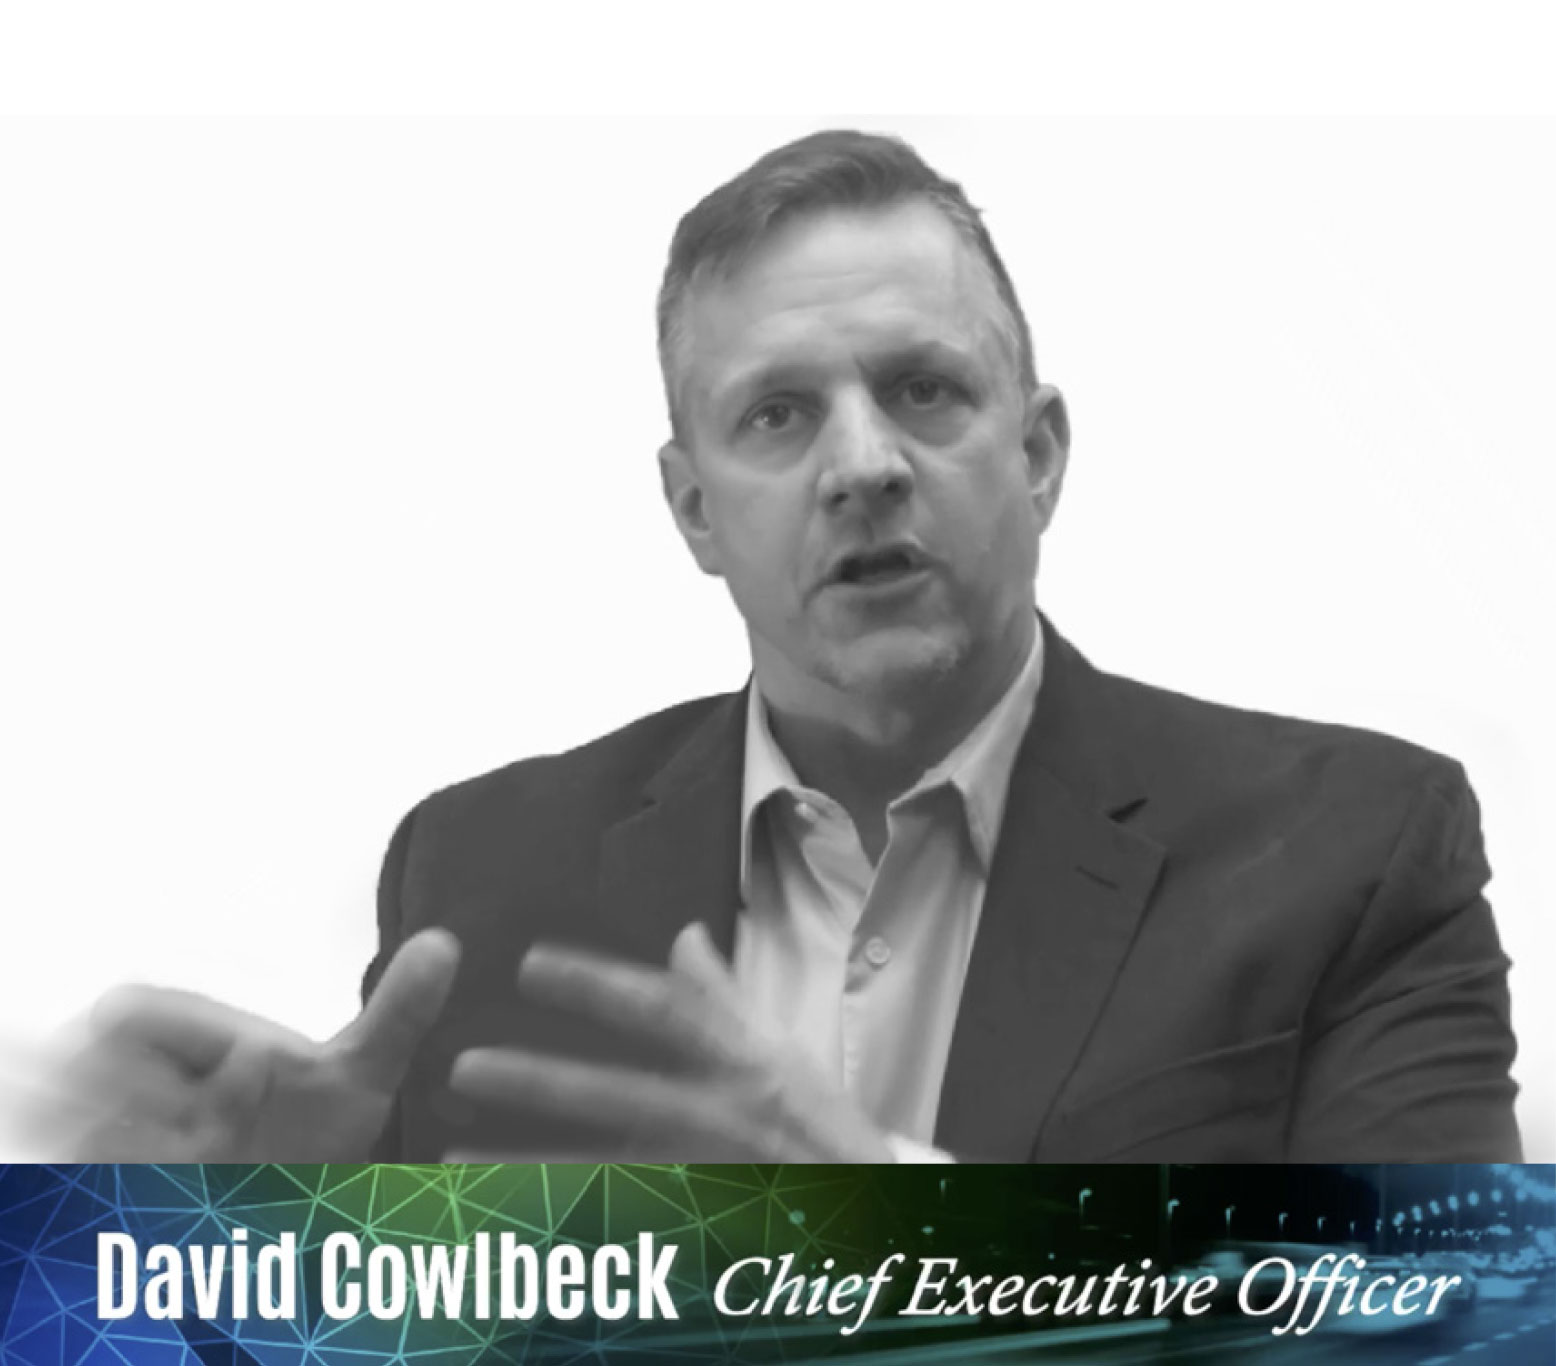 A photo of David Cowlbeck, the CEO OF Loss Prevention Services.